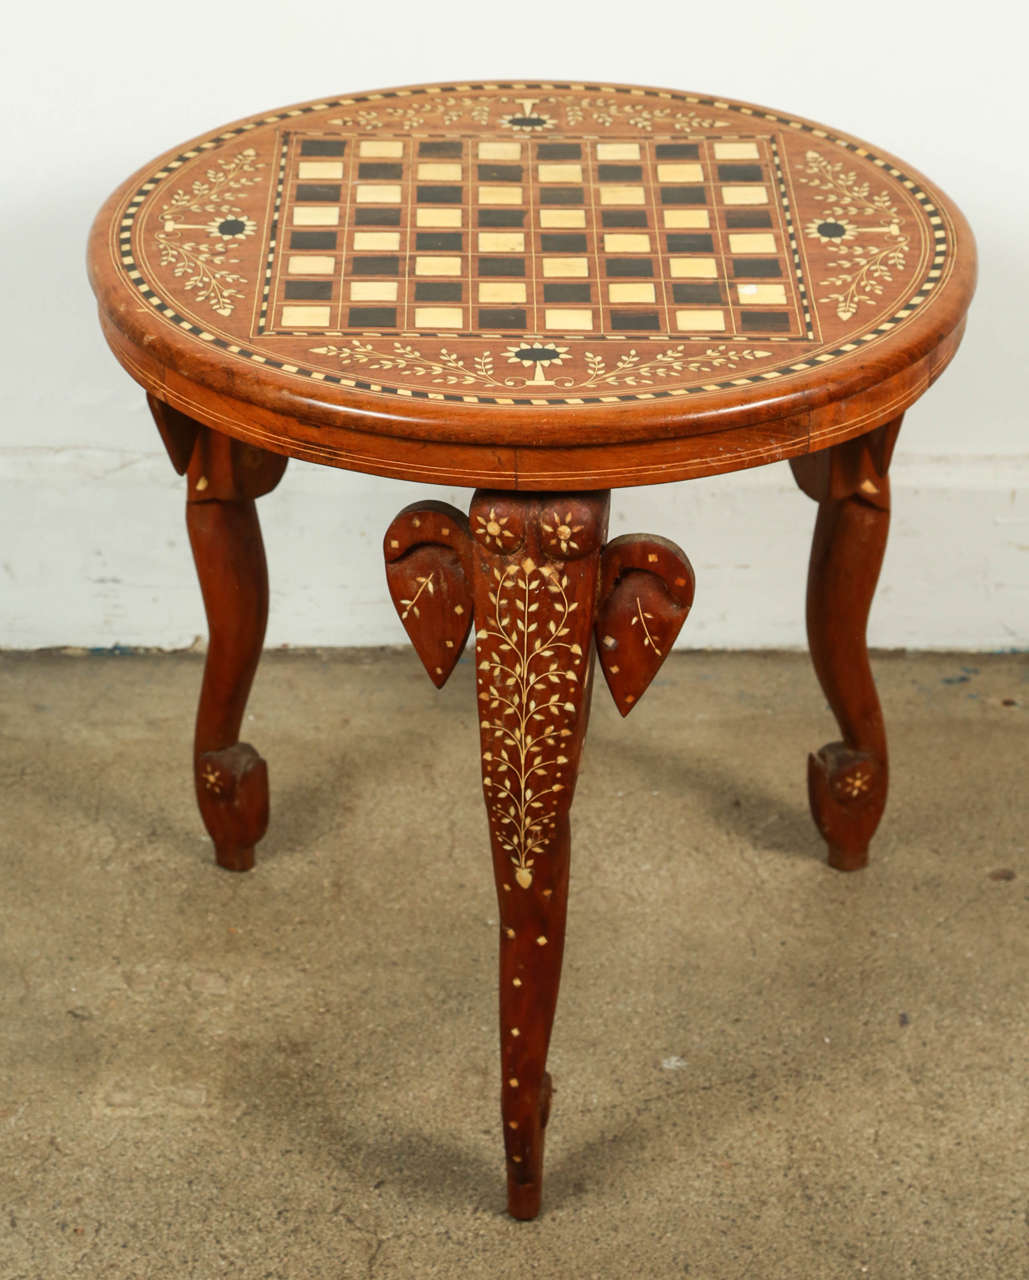 Elegant Anglo Indian round side table delicately handcrafted and inlaid with mother-of-pearl and ebony. 
Floral Moorish inlay designs and elephant head on the three legs.
With chest board design on top.
Vintage wooden game chest table.